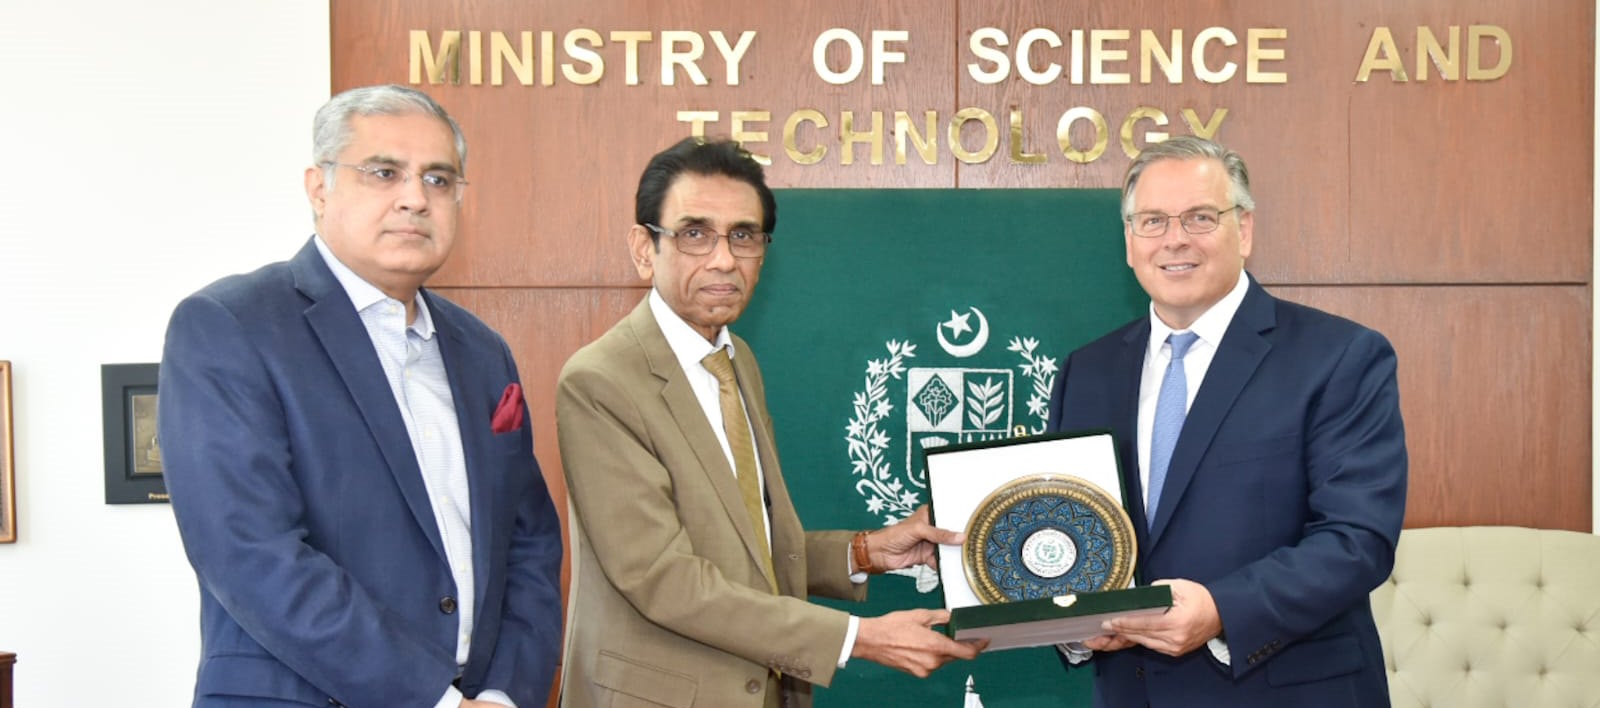 US Ambassador Donald Blome called on the Minister for Science and Technology Dr Khalid Maqbool Siddiqui in Islamabad.